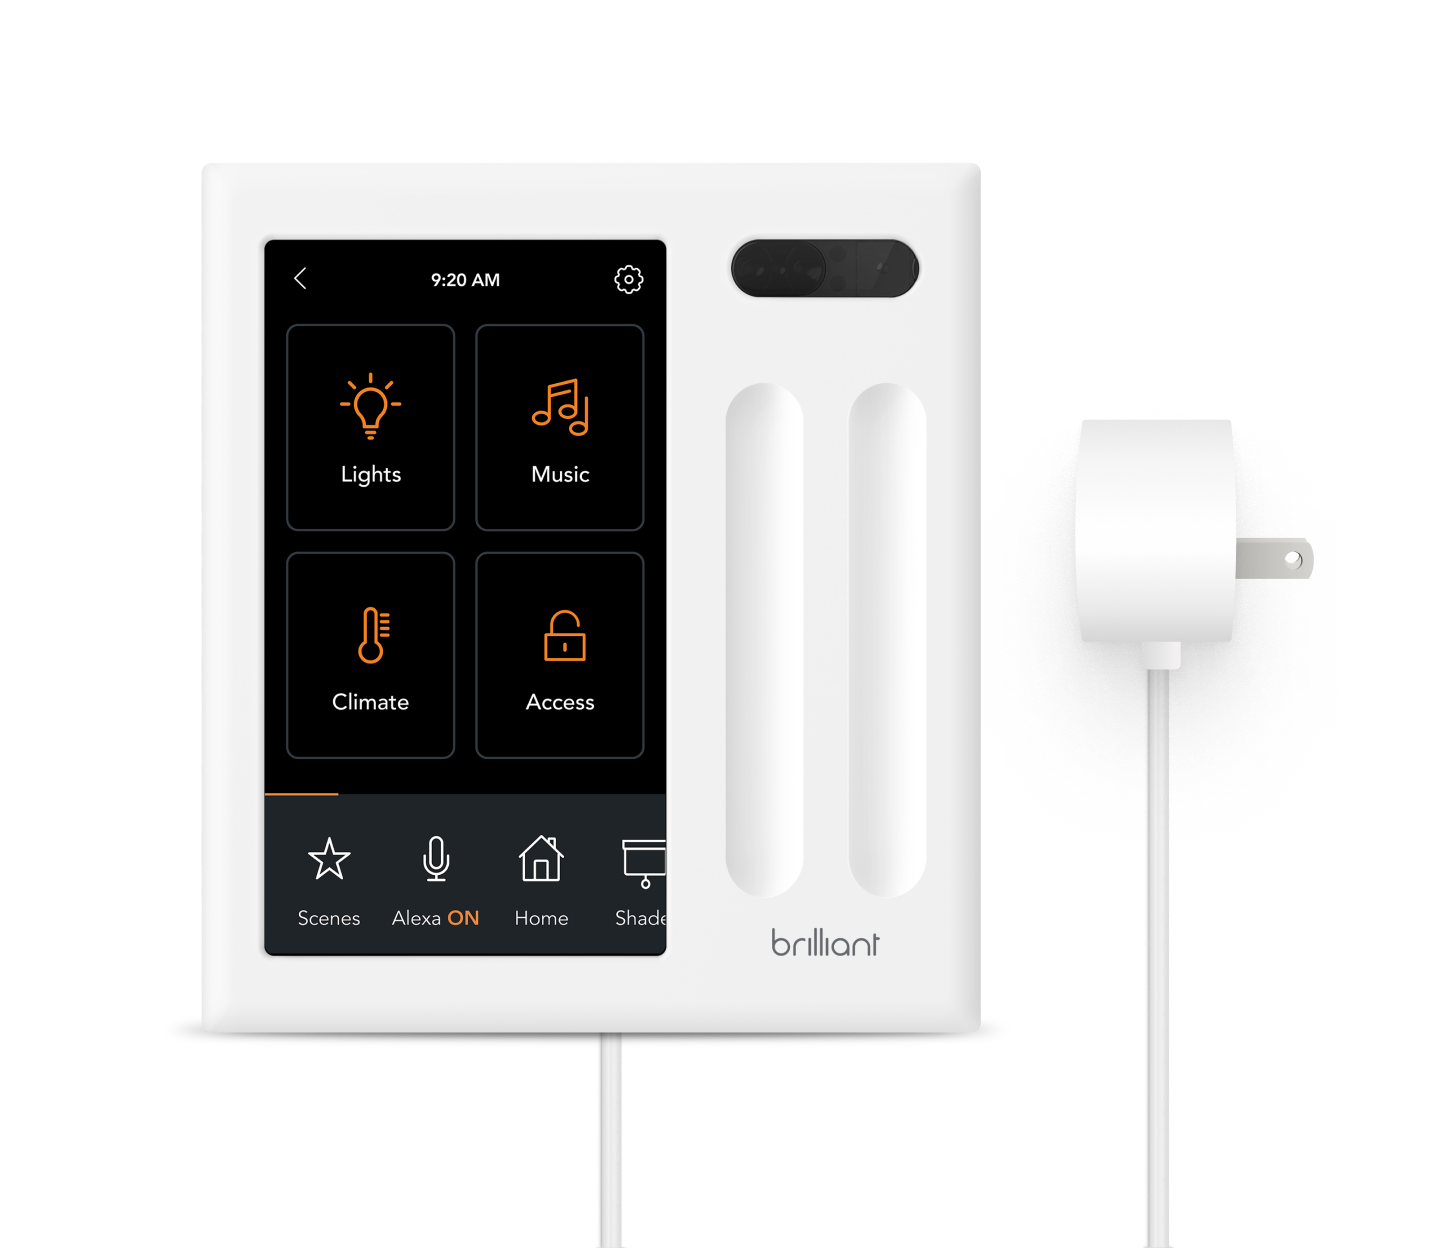 5 GHz Smart Plugs: Should You Buy One?